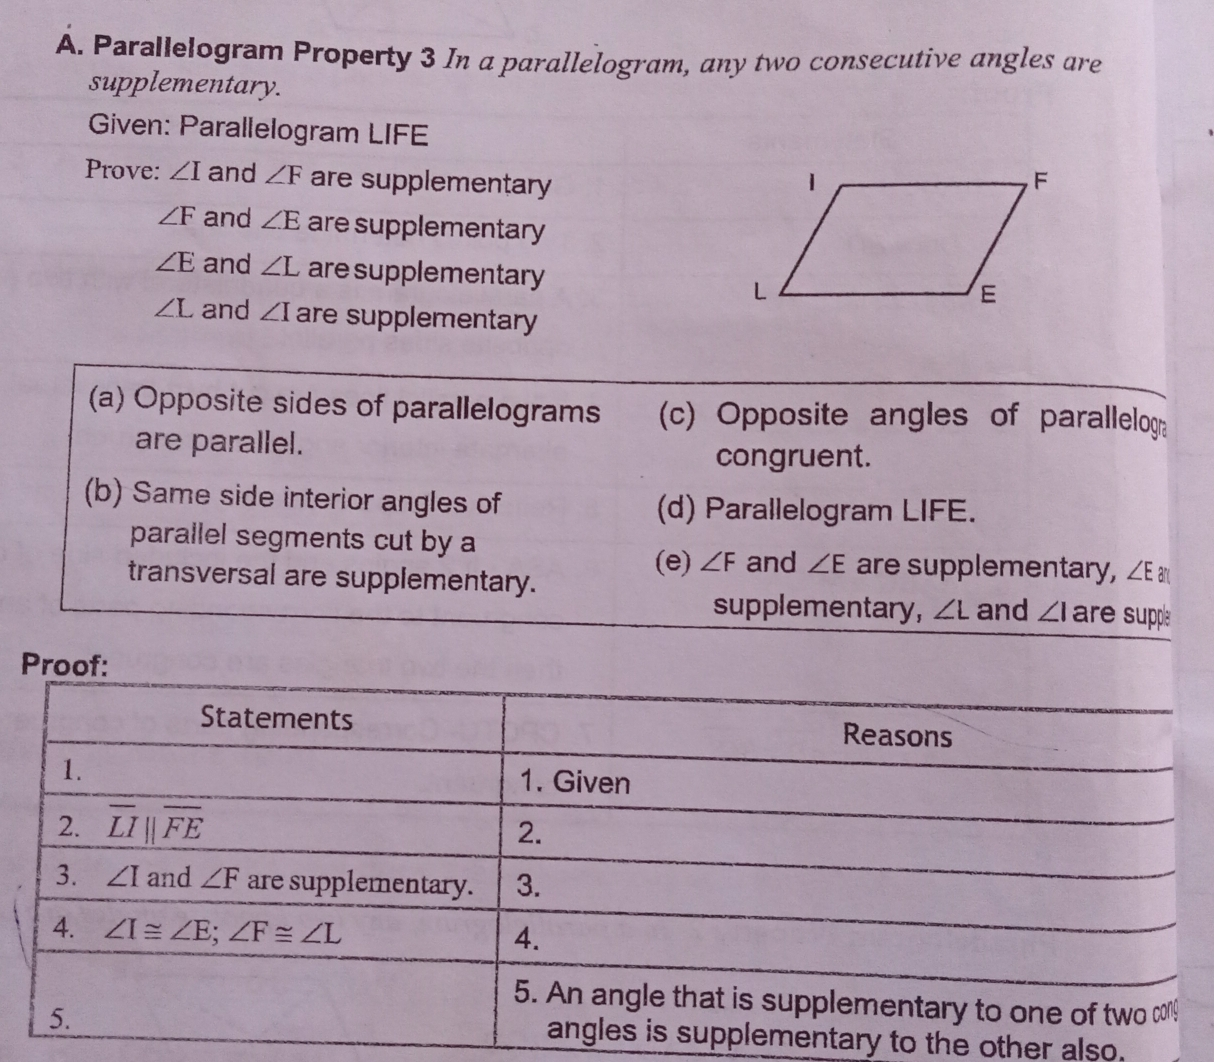 A. Parallelogram Property 3 In a parallelogram, any two consecutive angles are supplementary. Given: Parallelogram LIFE Prove: angle I and angle F are supplementary angle F and angle E are supplementary angle E and angle L are supplementary angle L and angle I are supplementary a Opposite sides of parallelograms c Opposite angles of parallelog are parallel. congruent. b Same side interior angles of d Parallelogram LIFE. parallel segments cut by a and angle E are supplementary, angle E ar transversal are supplementary. e angle F supplementary, angle L and angle 1 are supps tary to the other also.